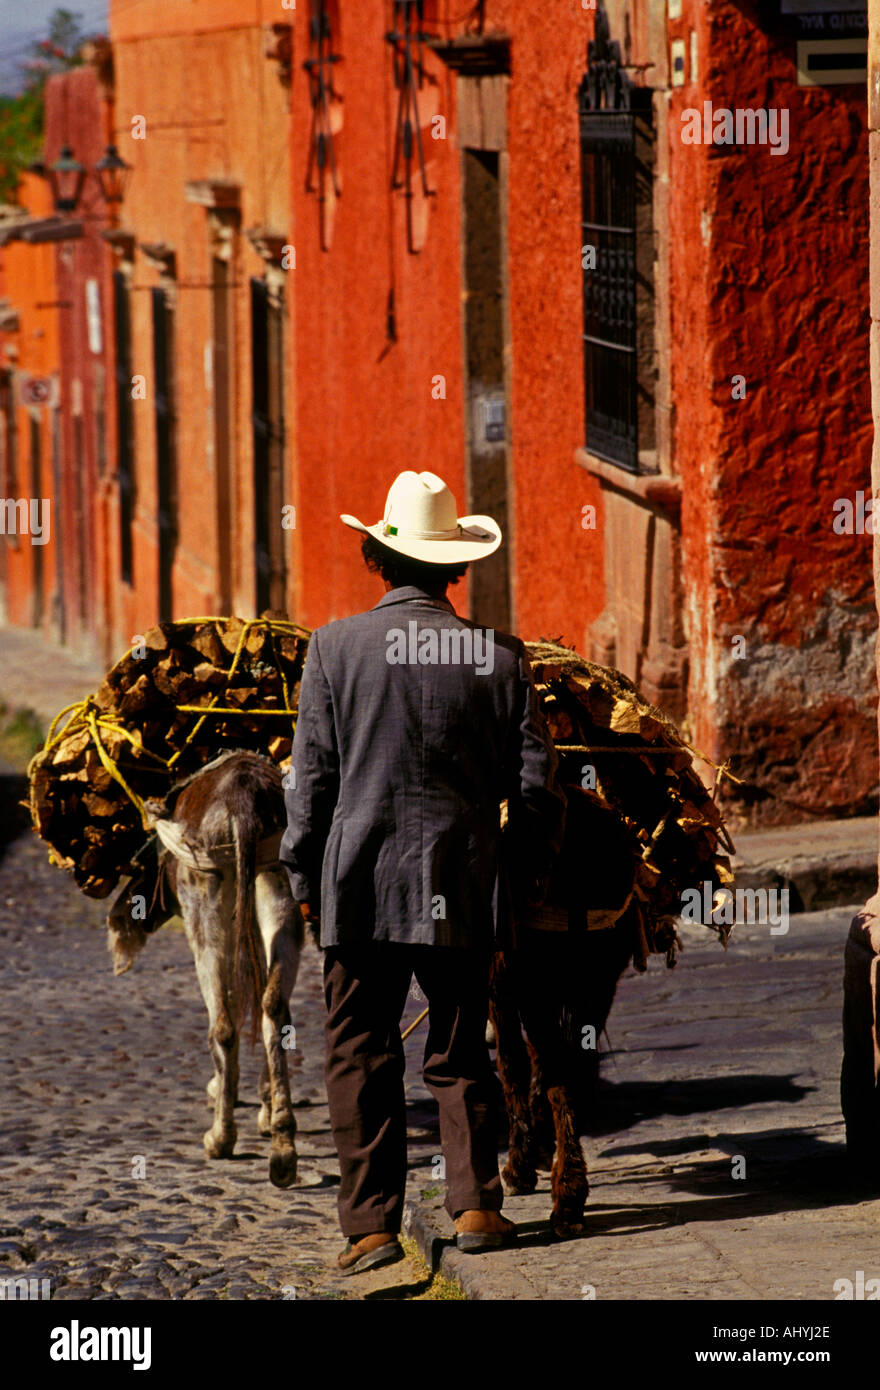 1, one, Mexican man, Mexican man with firewood, vendor, selling wood, town of San Miguel de Allende, San Miguel de Allende, Guanajuato State, Mexico Stock Photo